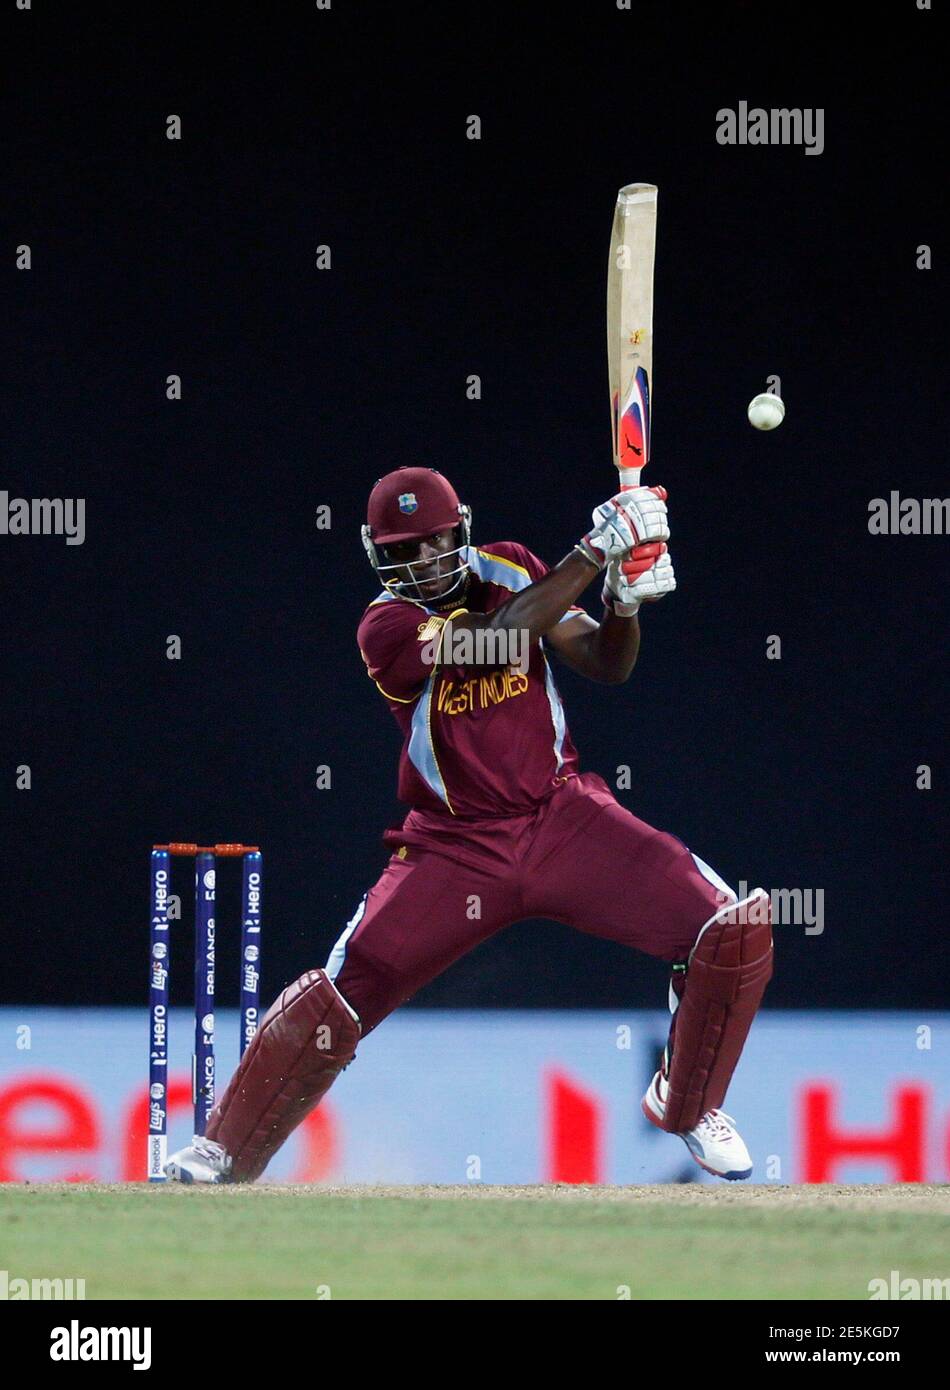 West Indies' Andre Russell plays a shot during their Twenty20 World Cup  Super 8 cricket match against Sri Lanka in Pallekele September 29, 2012.  REUTERS/Dinuka Liyanawatte (SRI LANKA - Tags: SPORT CRICKET